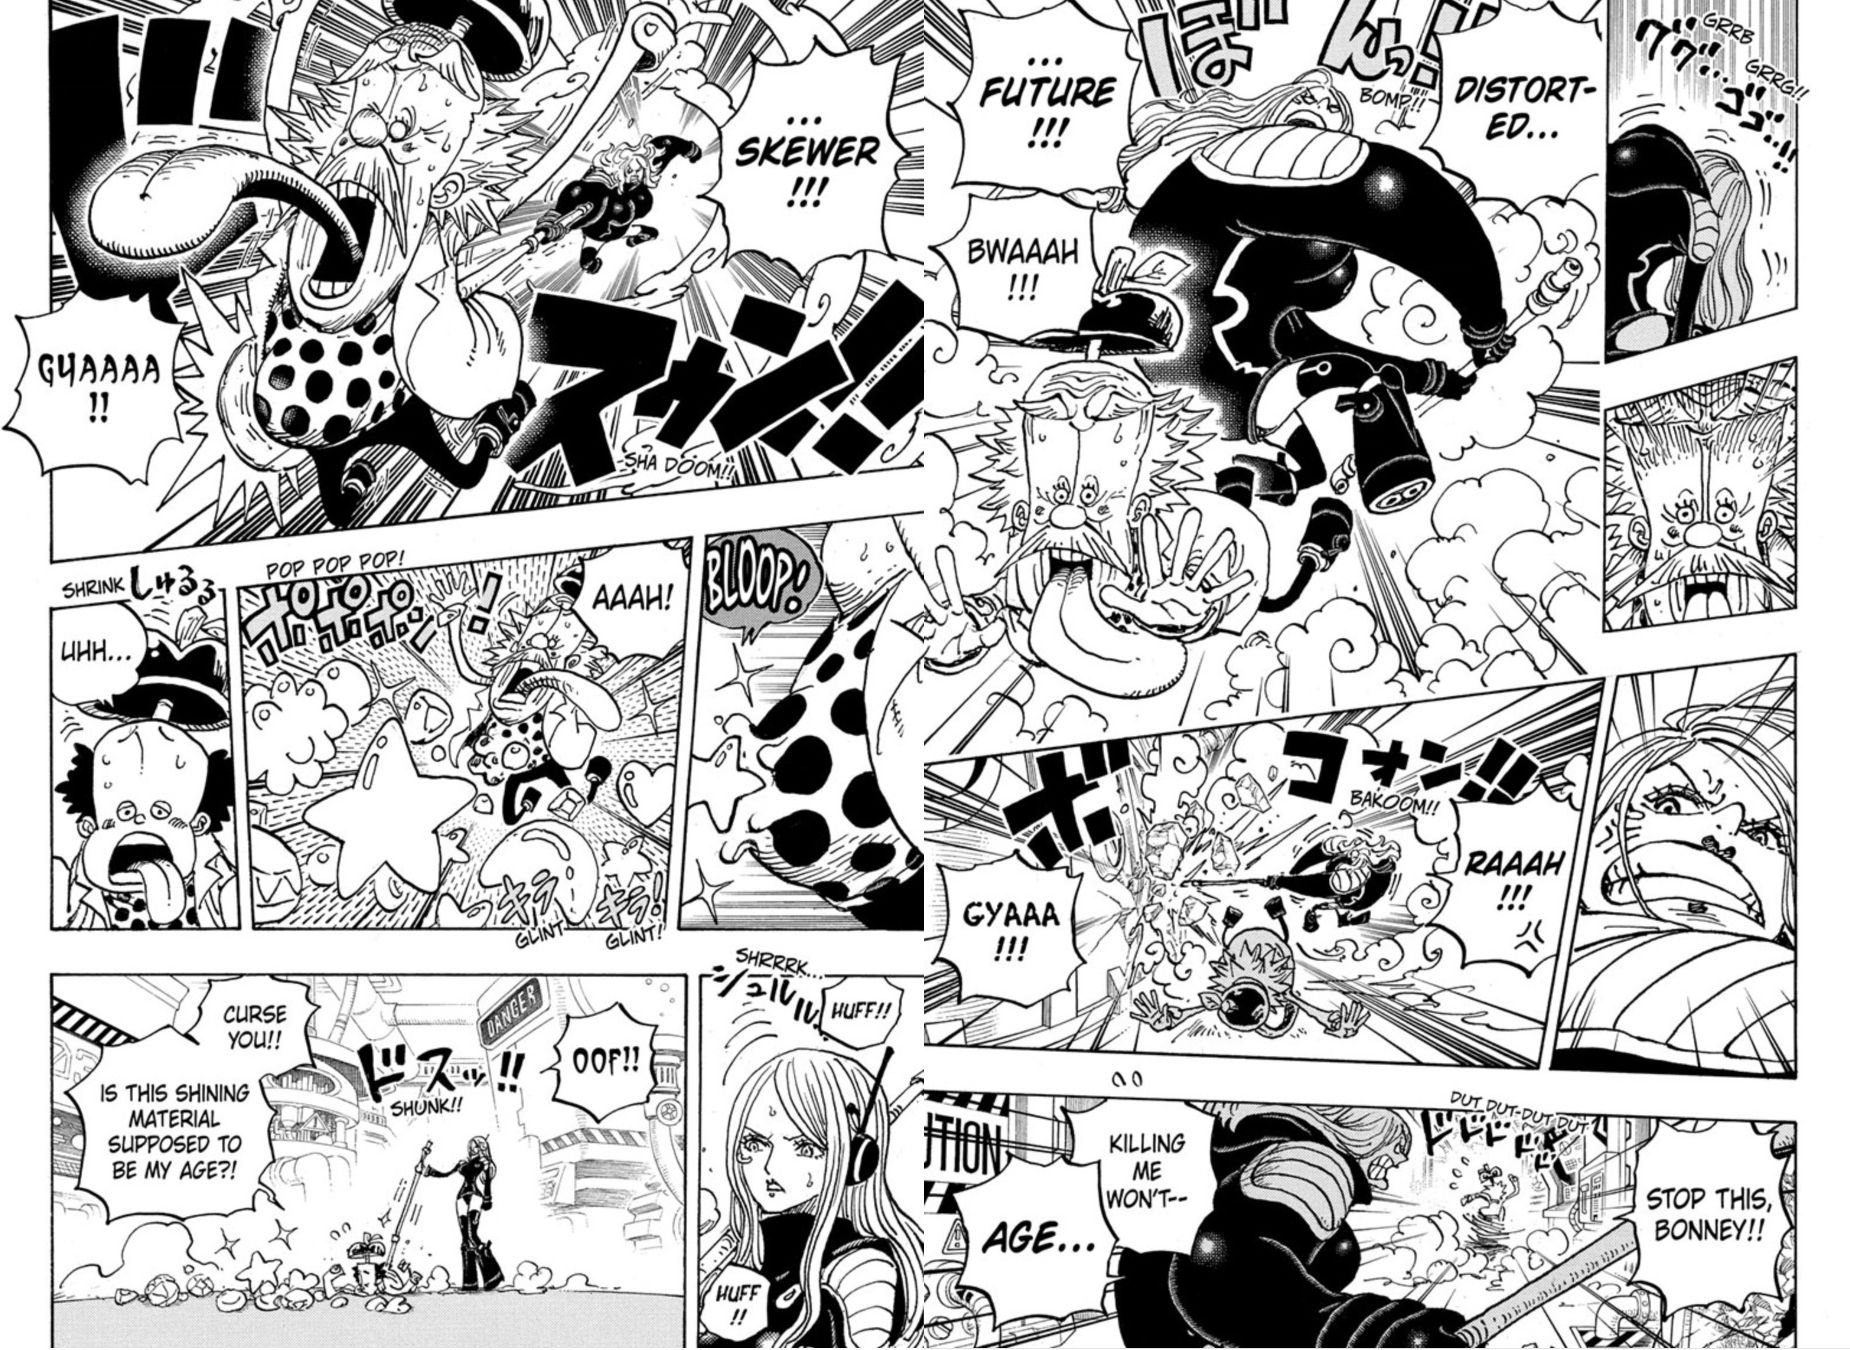 One Piece Chapter 1072 Pages 3-4